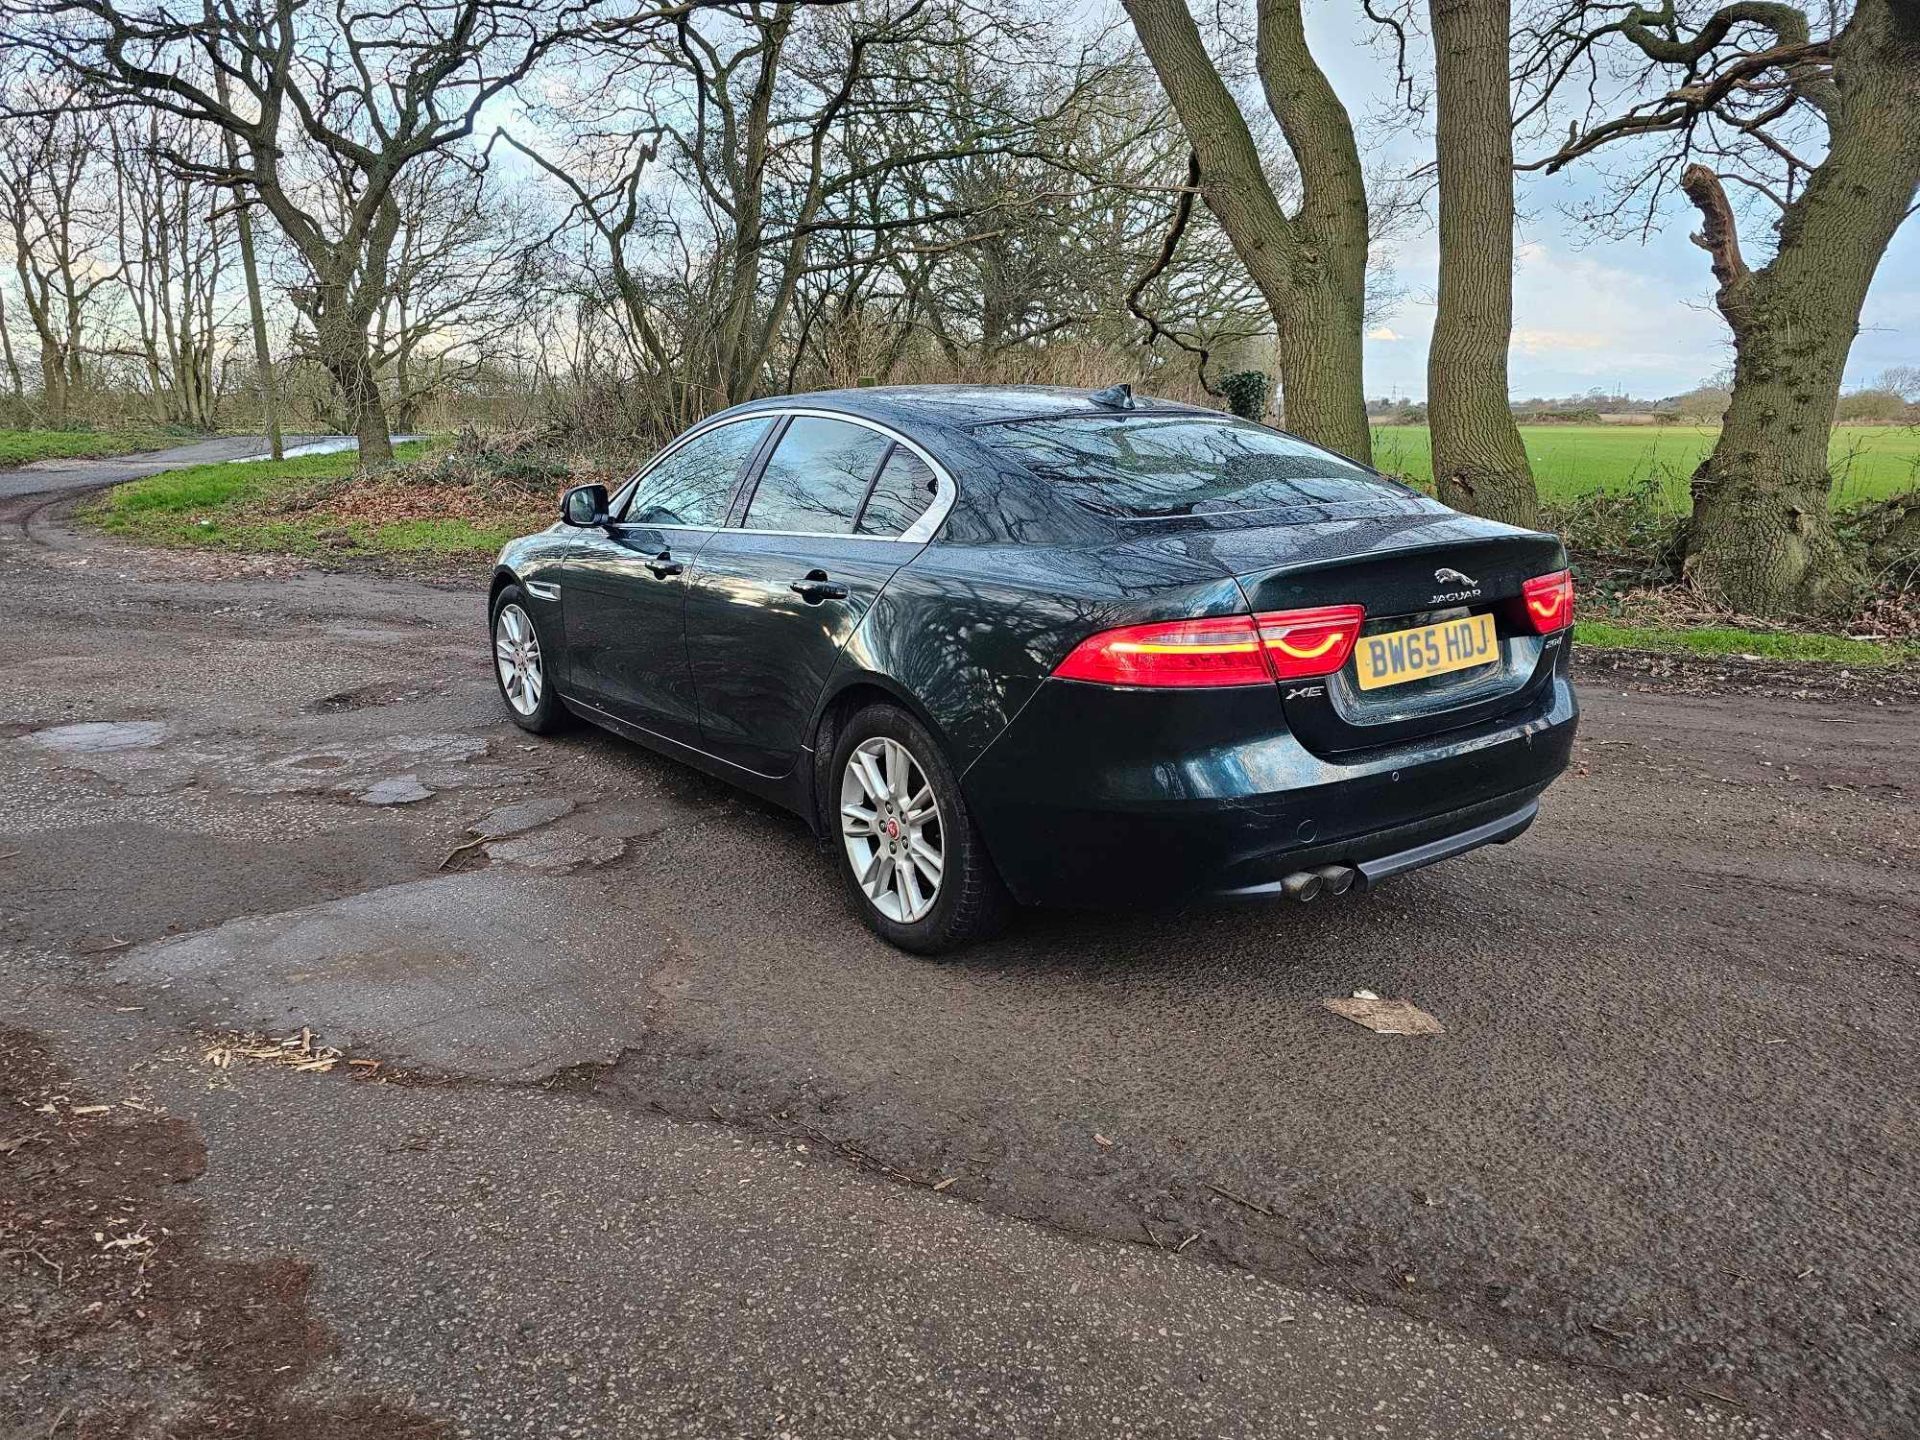 2015 65 JAGUAR XE SALOON - STARTS AND DRIVES BUT ENGINE IS NOISY - ALLOY WHEELS - 5 SERVICES. - Image 2 of 10